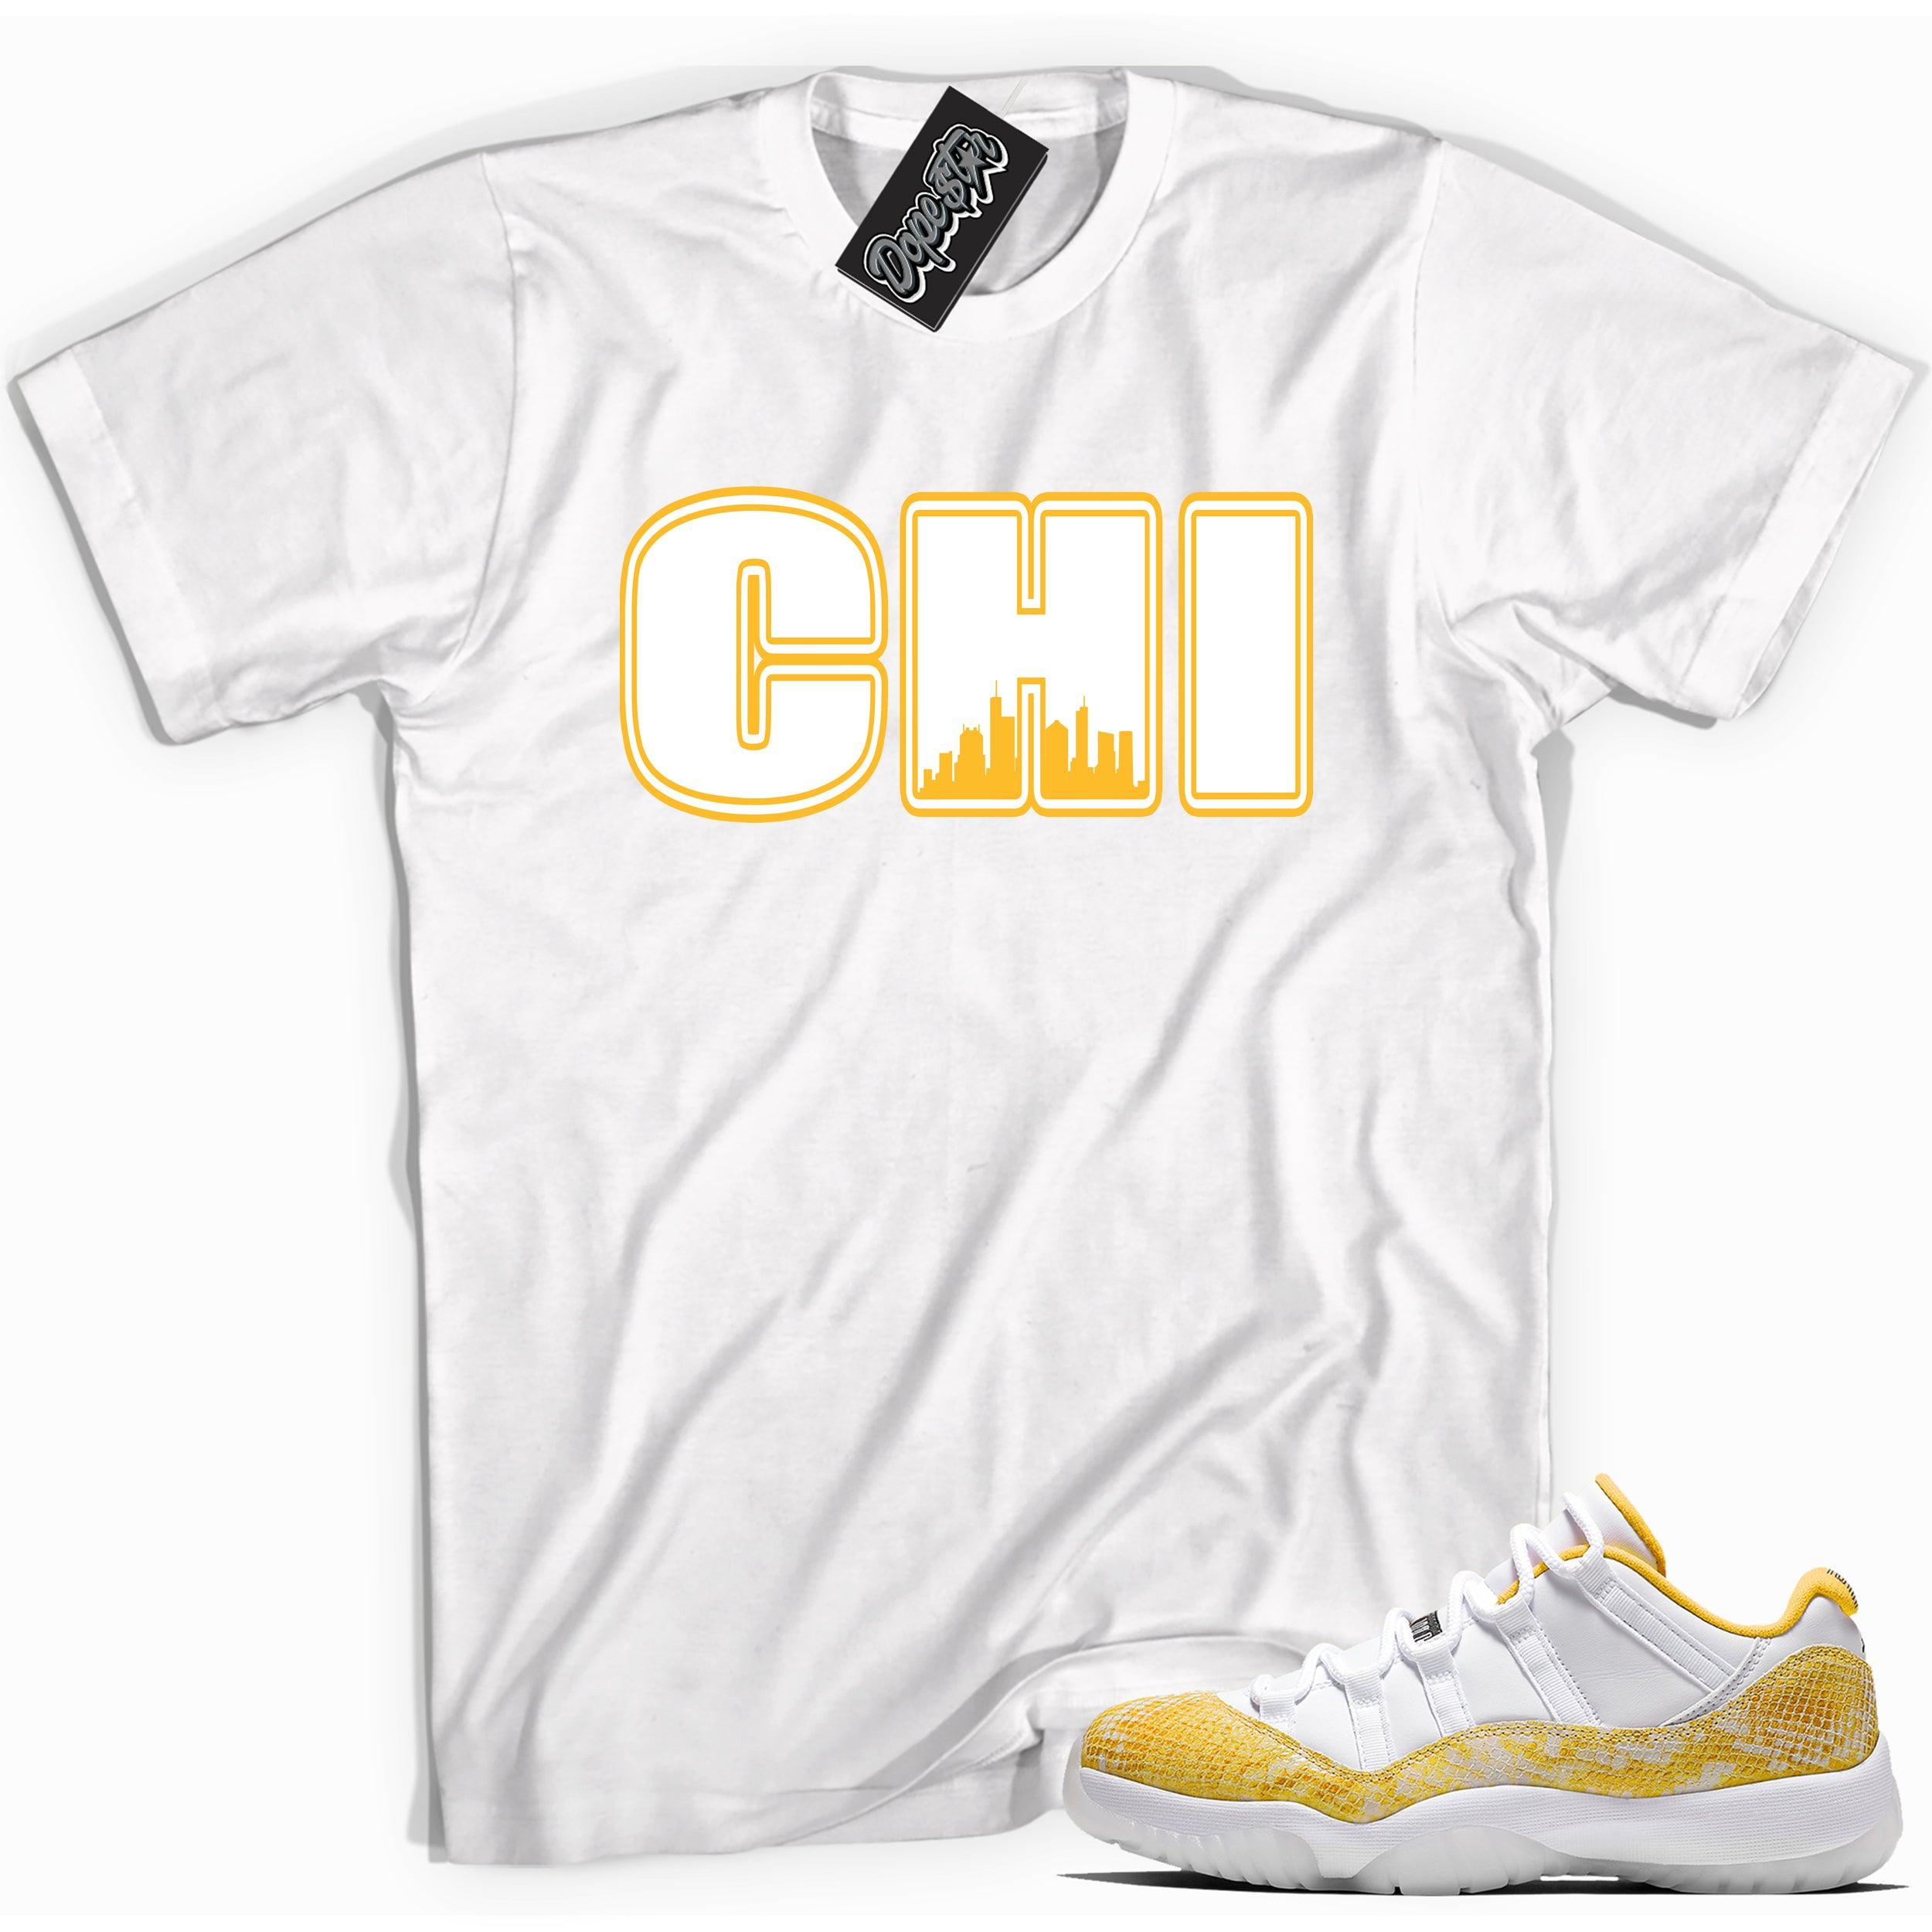 Cool white graphic tee with 'CHI' print, that perfectly matches Air Jordan 11 Low Yellow Snakeskin sneakers